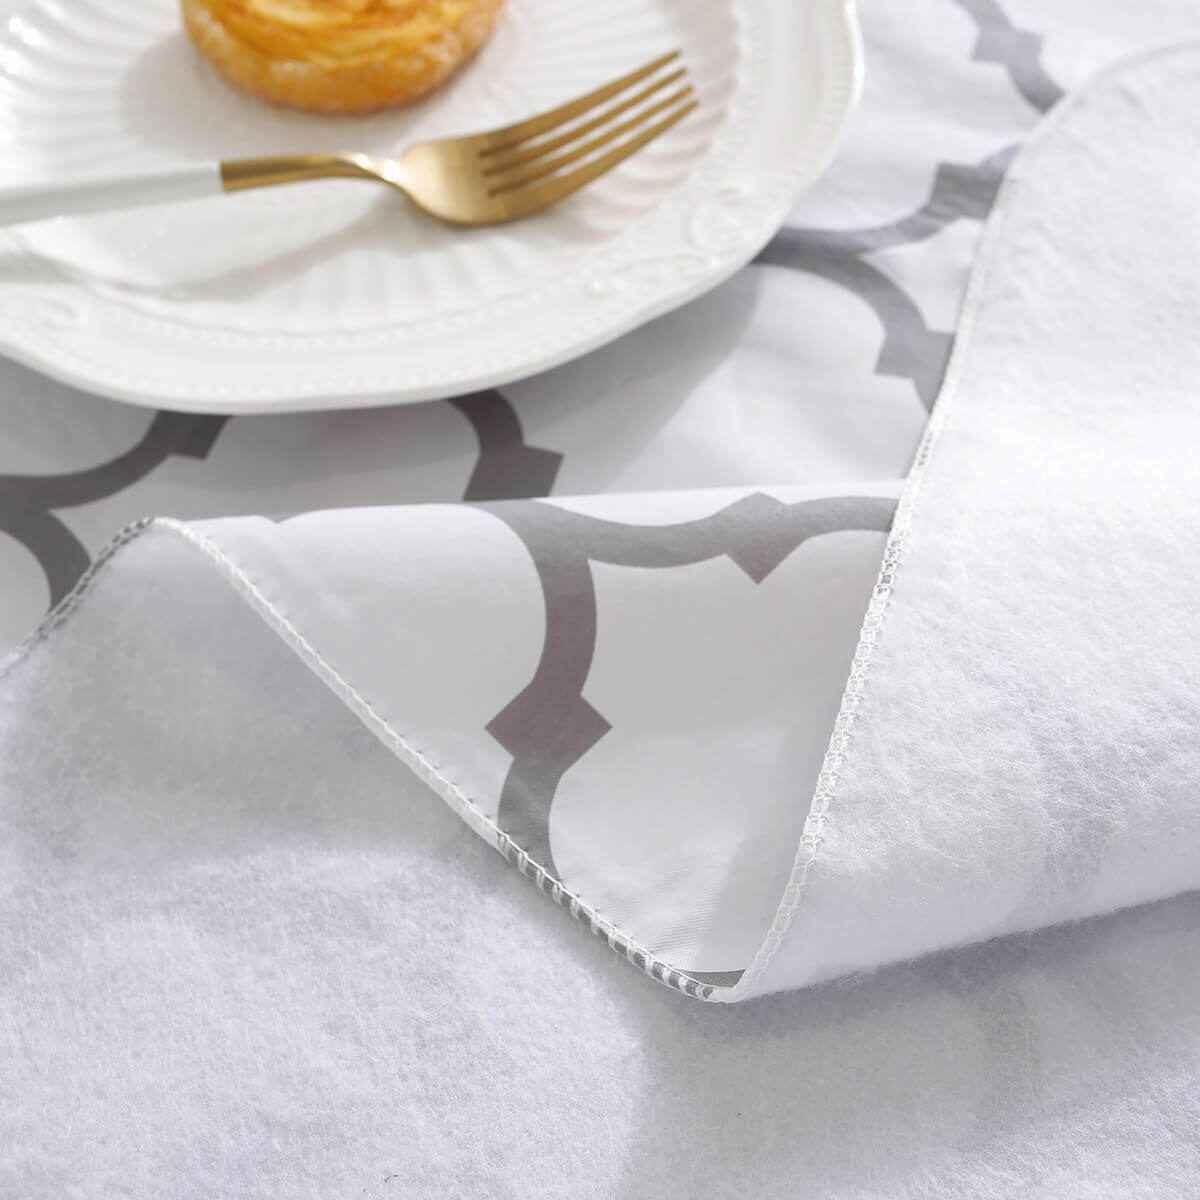 SASTYBALE vinyl tablecloth with flannel backing white